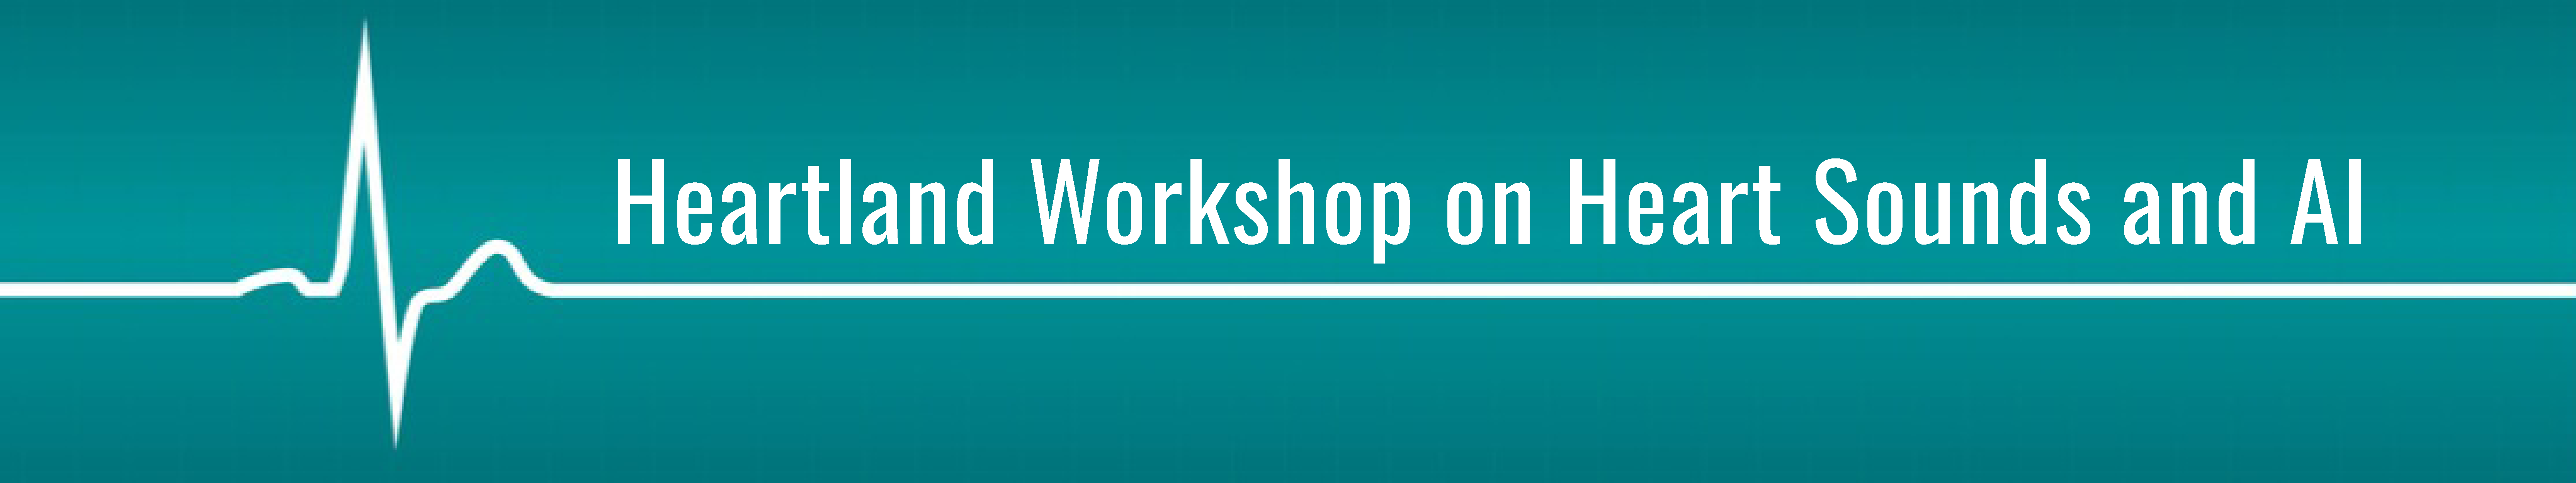 Turquoise graphic with sound wave and workshop title